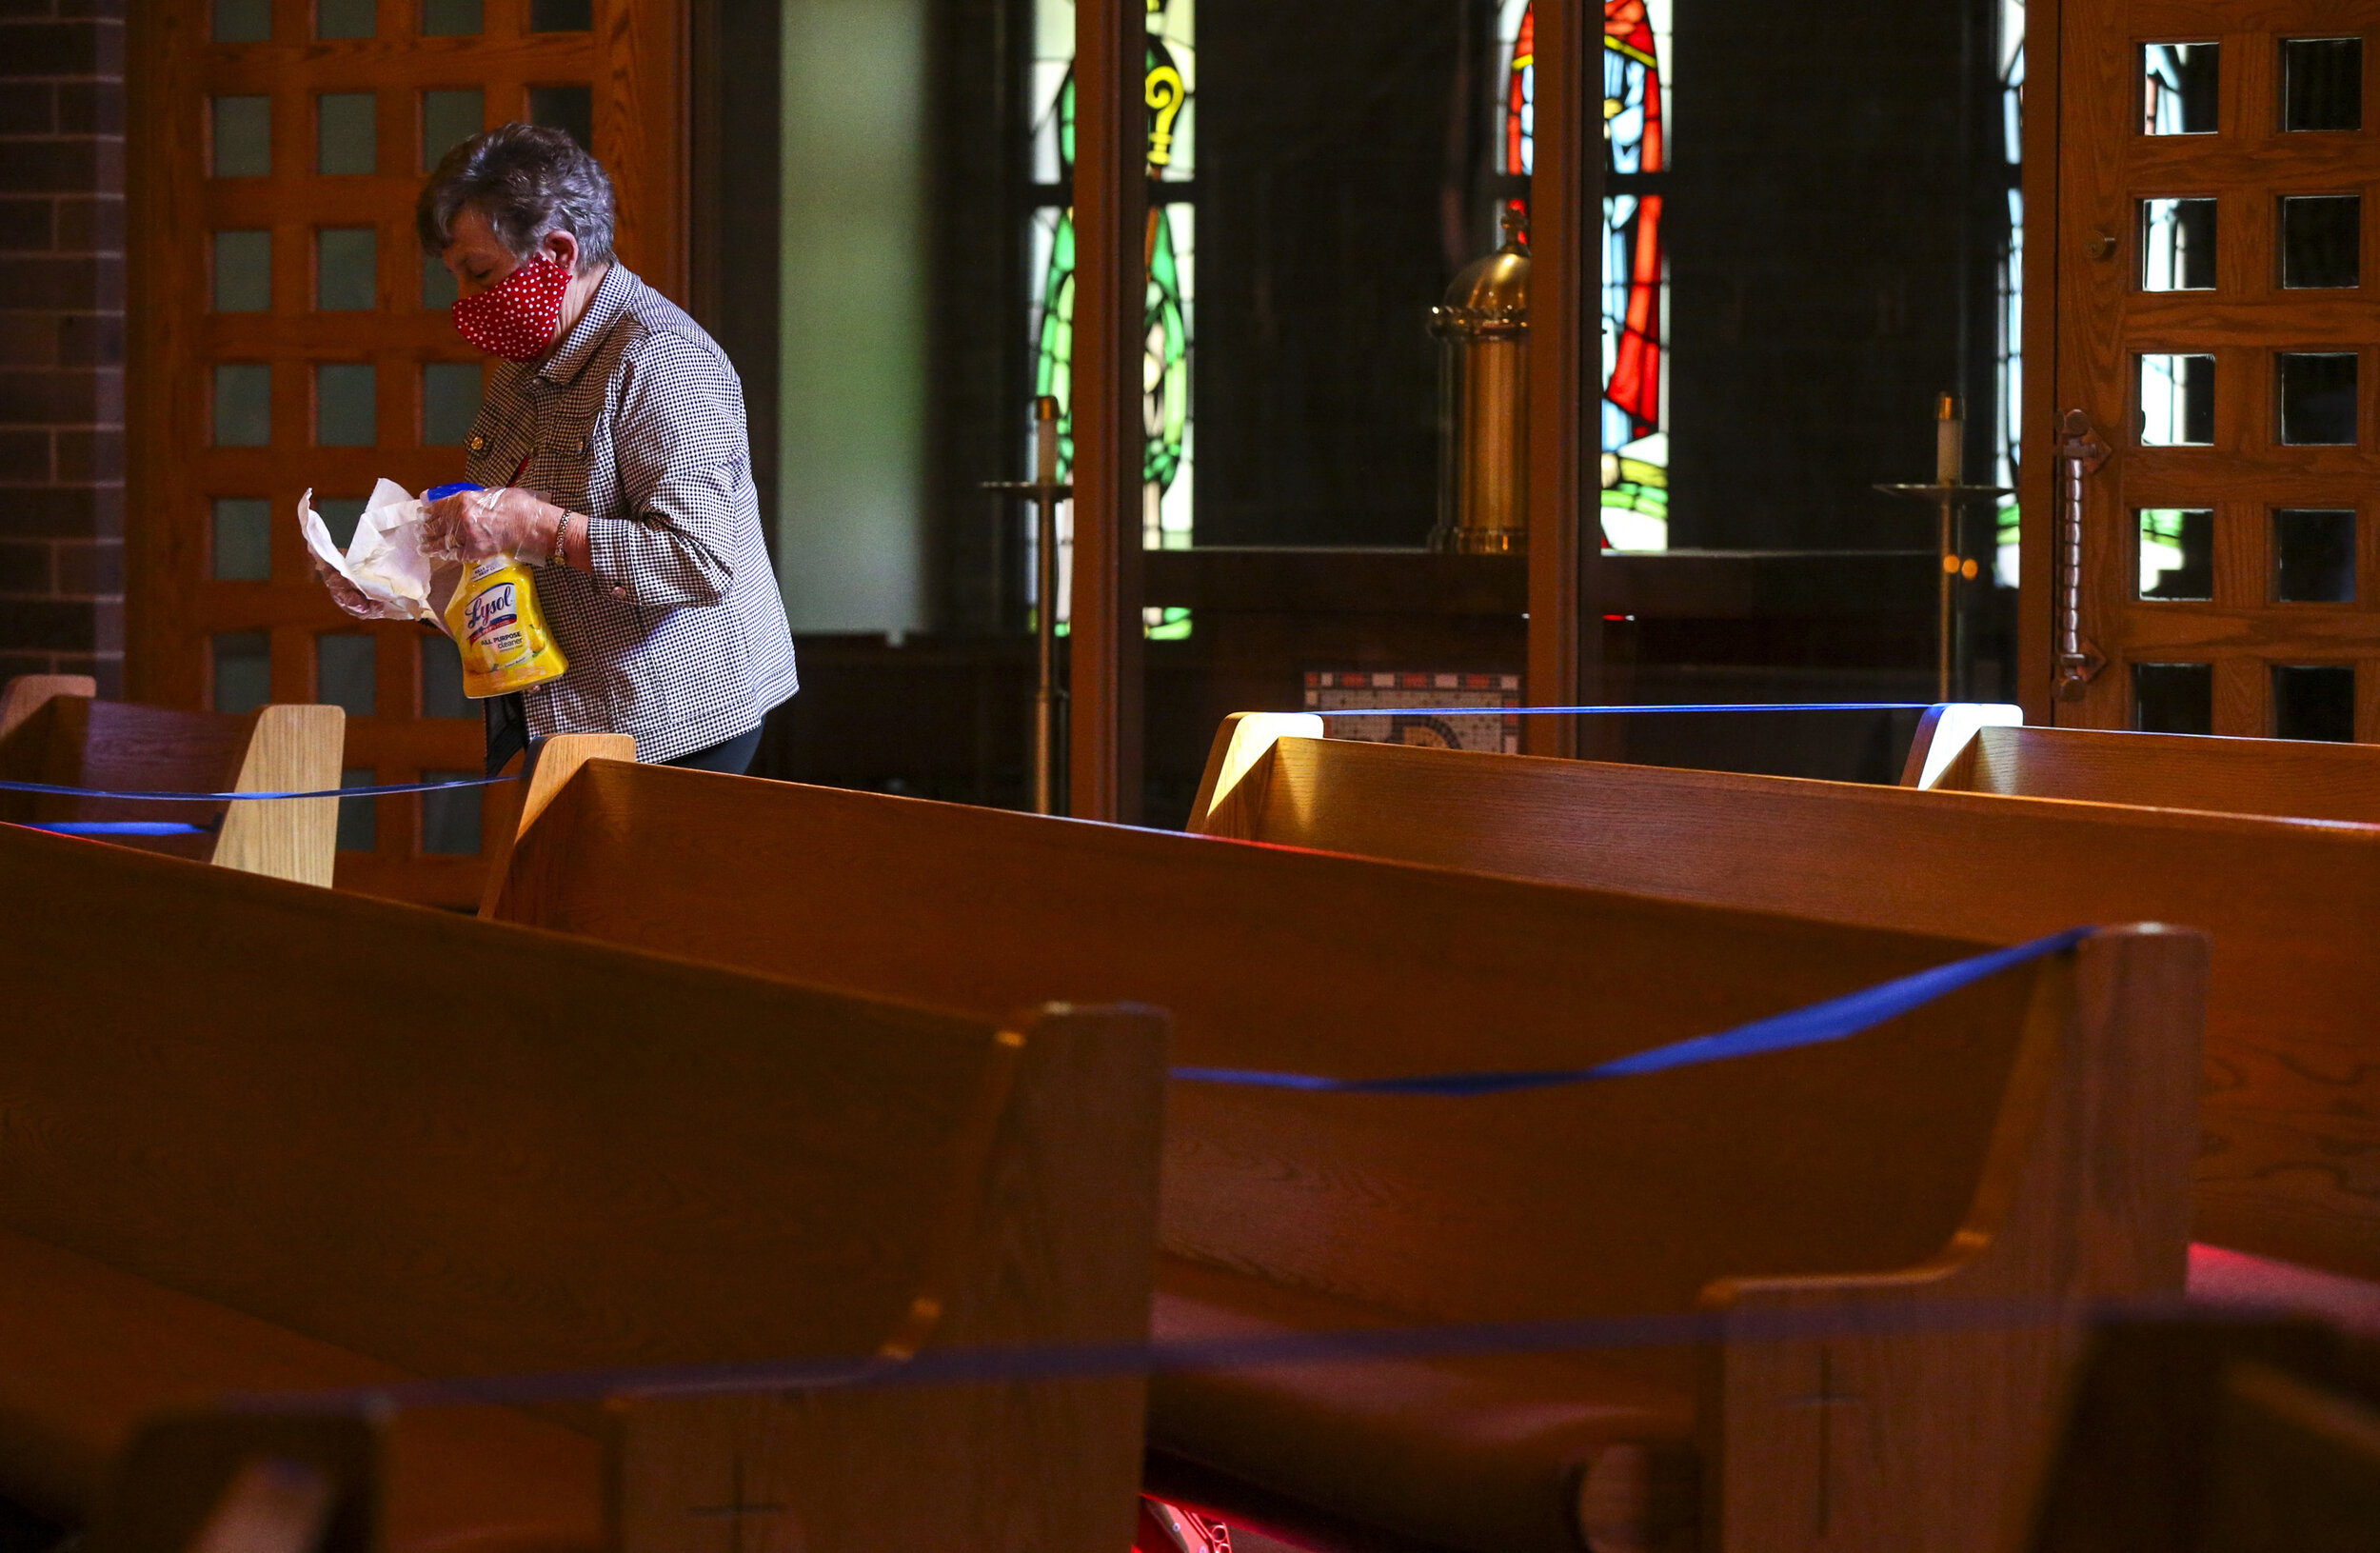  Parishioner Mardean Cook works through a section of pews sanitizing the various surfaces in the church while volunteering after the evening mass at St. Jude’s Catholic Church in Cedar Rapids on Saturday. The church opened up for its first mass since